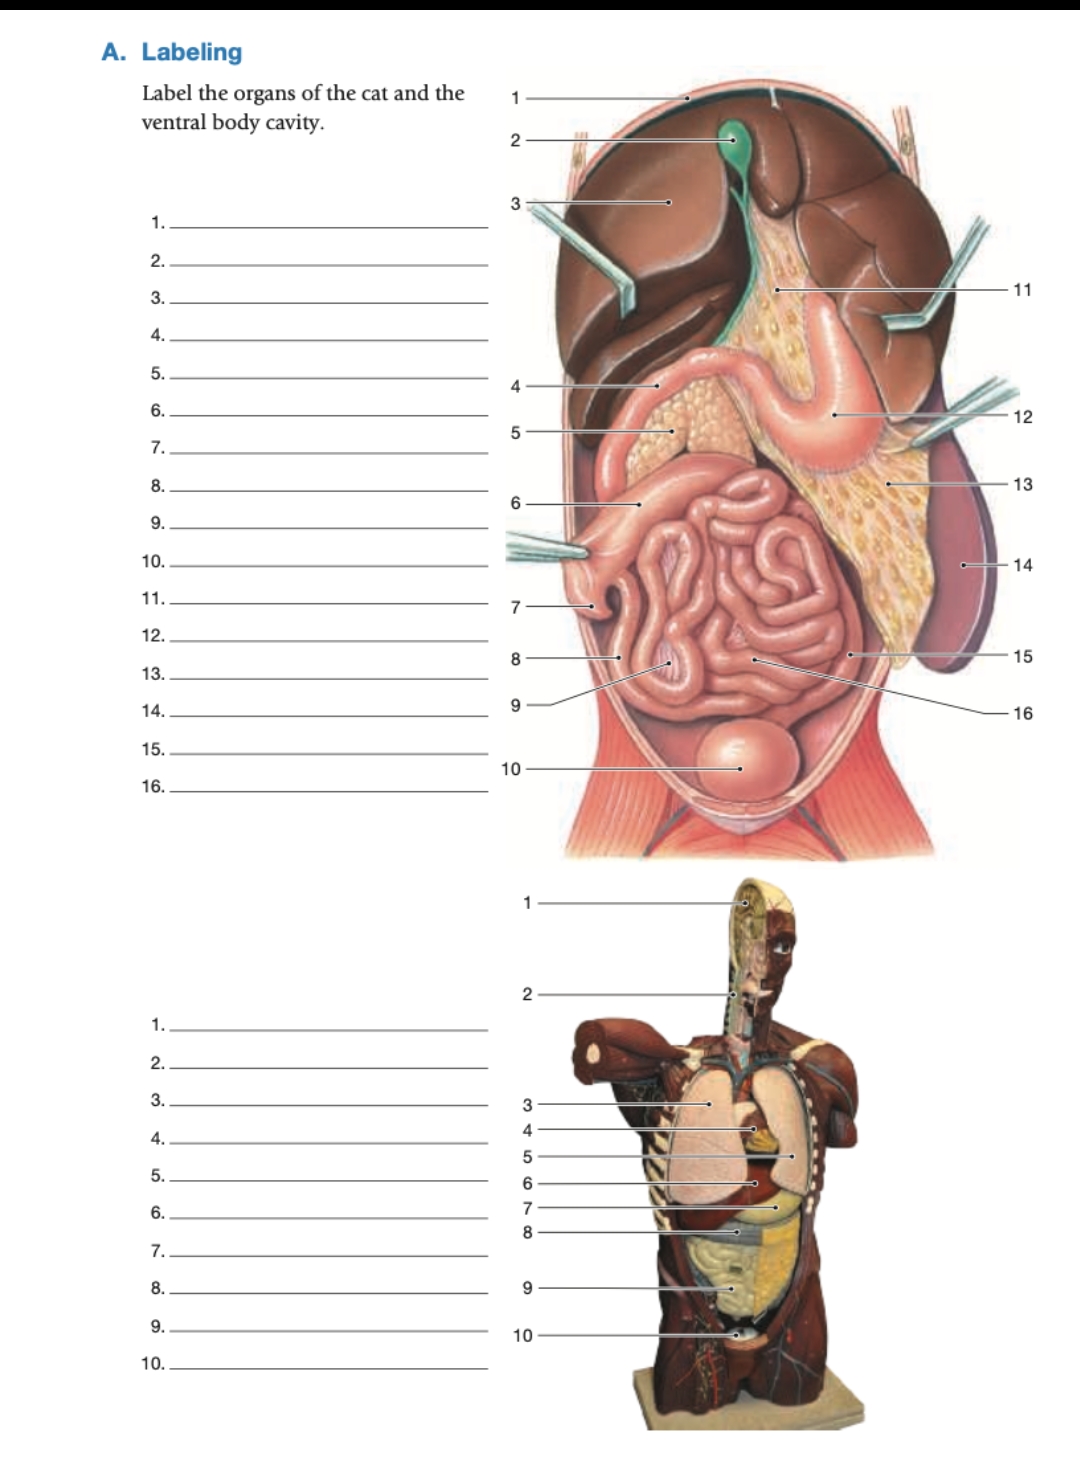 A. Labeling
Label the organs of the cat and the
ventral body cavity.
1.
2.
3.
4.
5.
6.
7.
8.
9.
10.
11.
12.
13.
14.
15.
16.
1.
2.
3.
4.
5.
6.
7.
8.
9.
10.
1
2
3
7
8
9
10
1
2
3
4
5
6
7
8
9
10
11
12
13
14
15
16